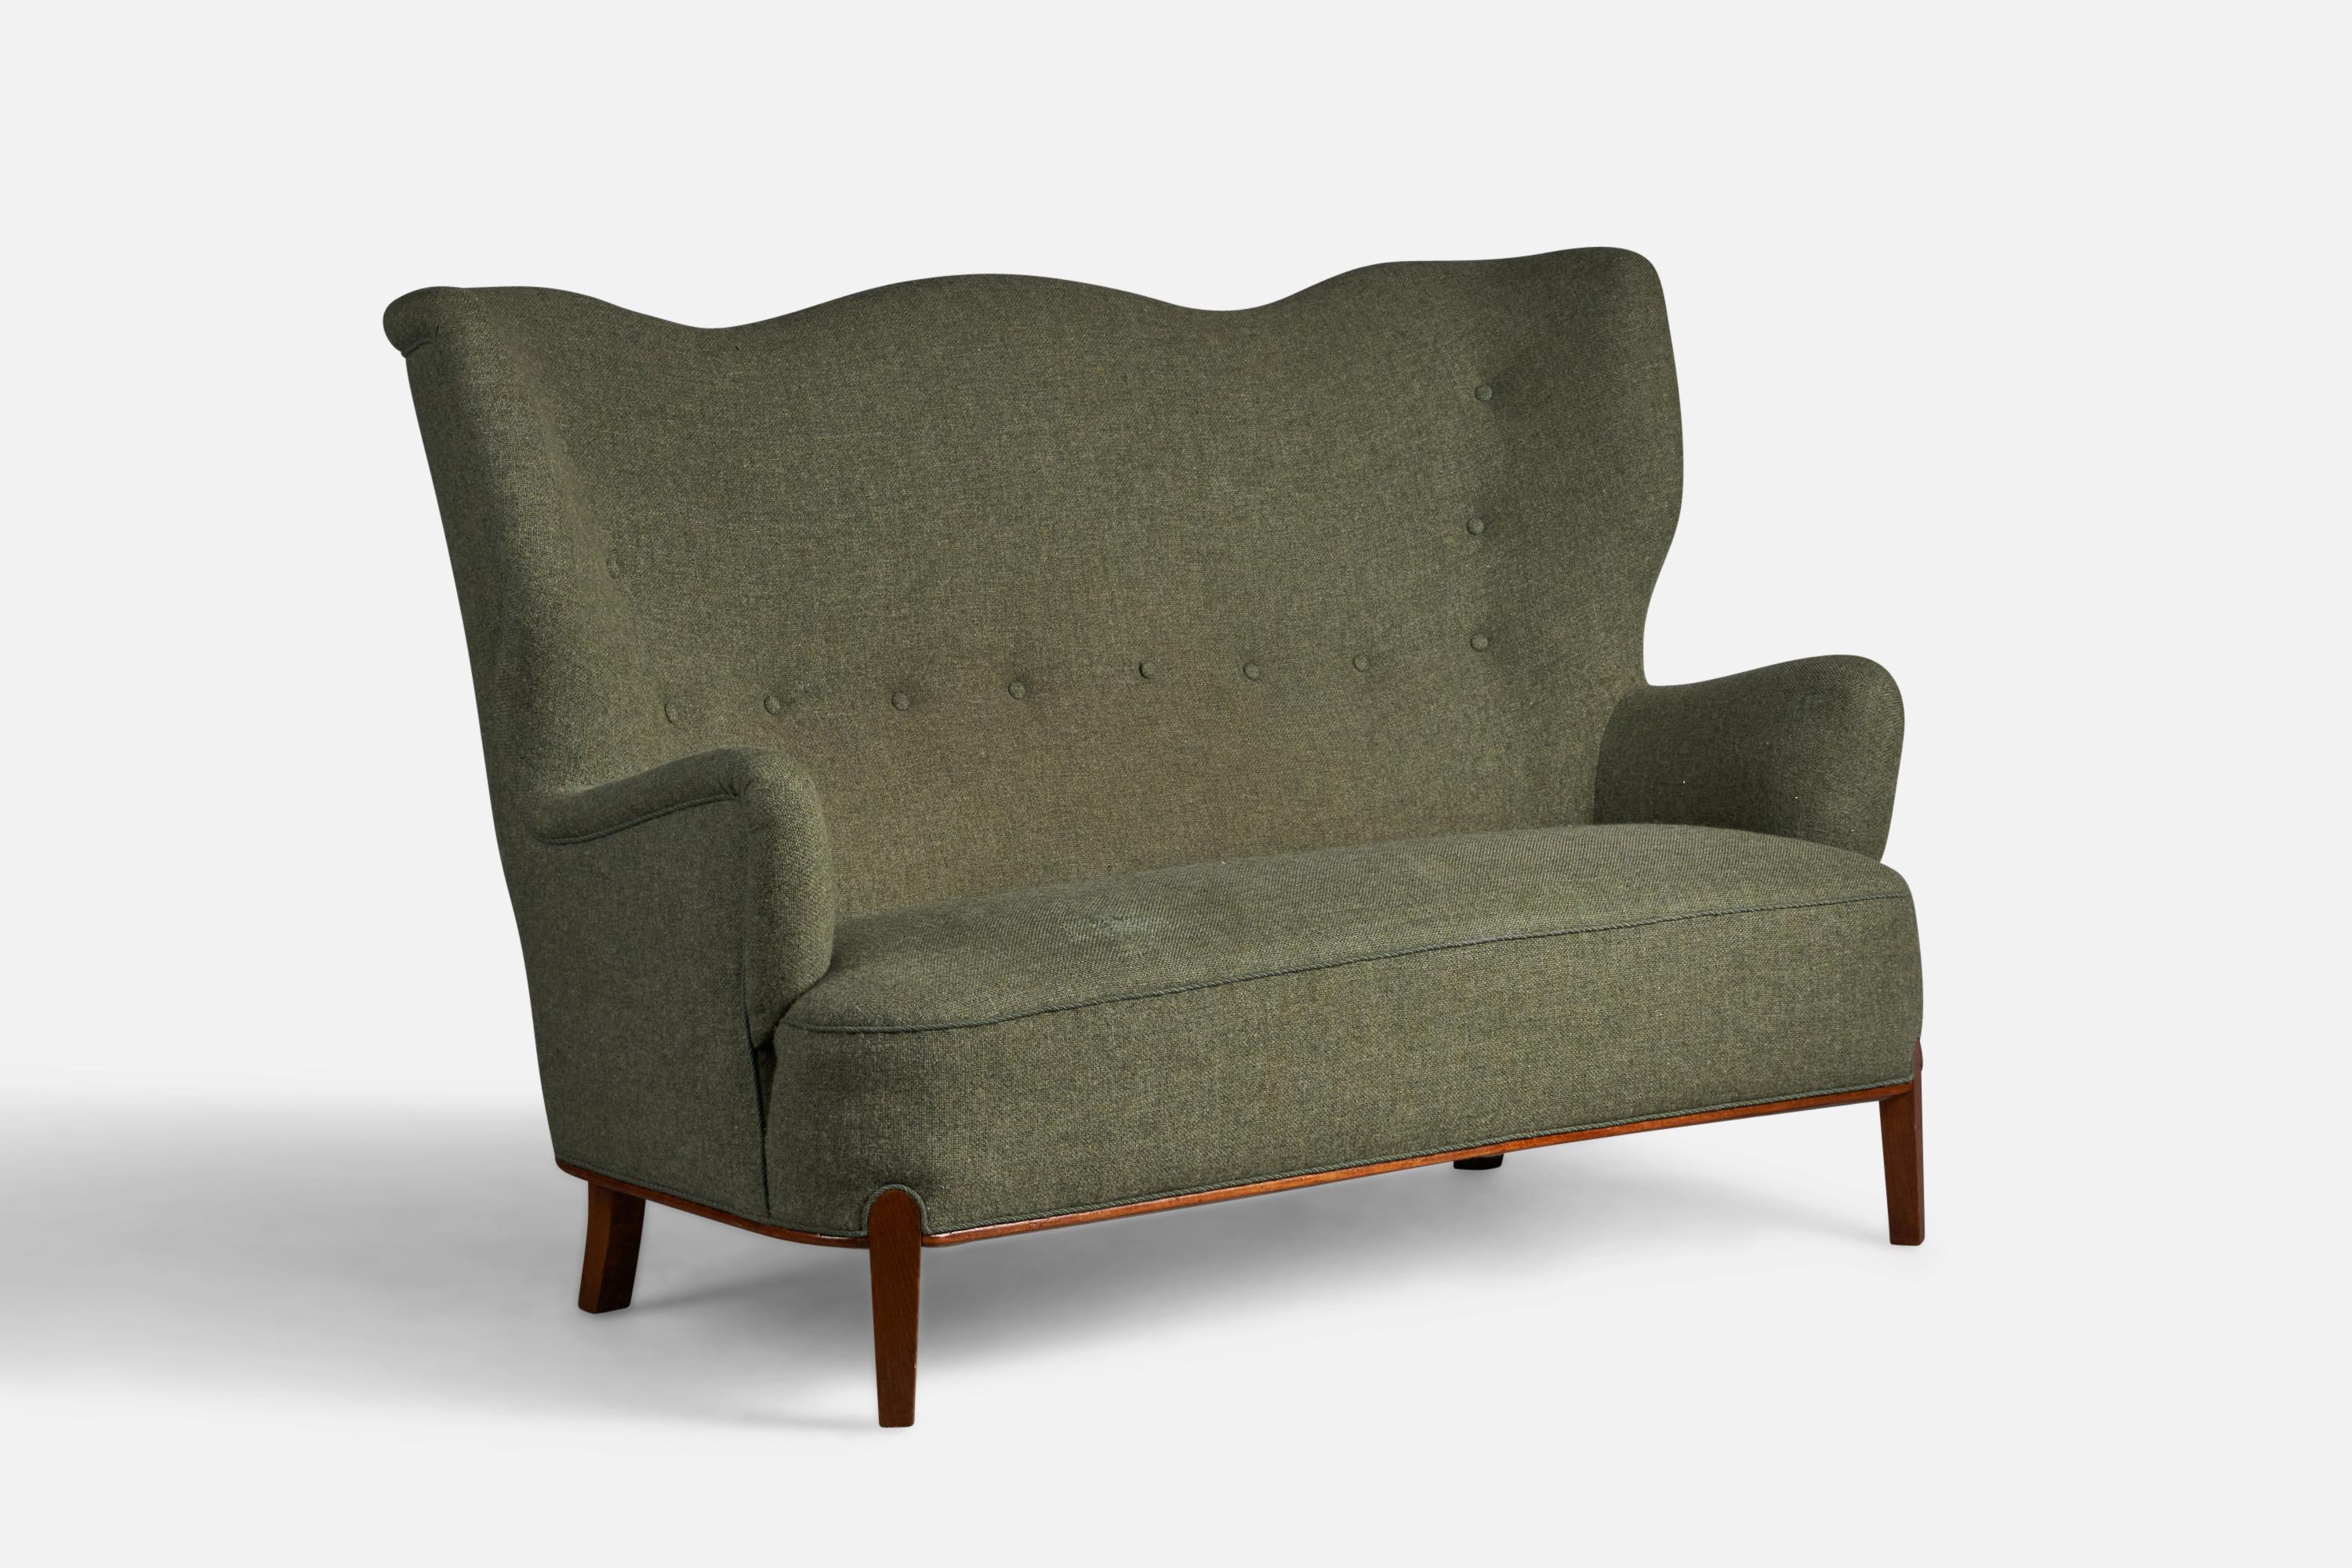 A stained beech and green fabric two-seater sofa or settee, designed by Bertil Söderberg and produced by Nordiska Kompaniet, Sweden, 1940s.

18” seat height